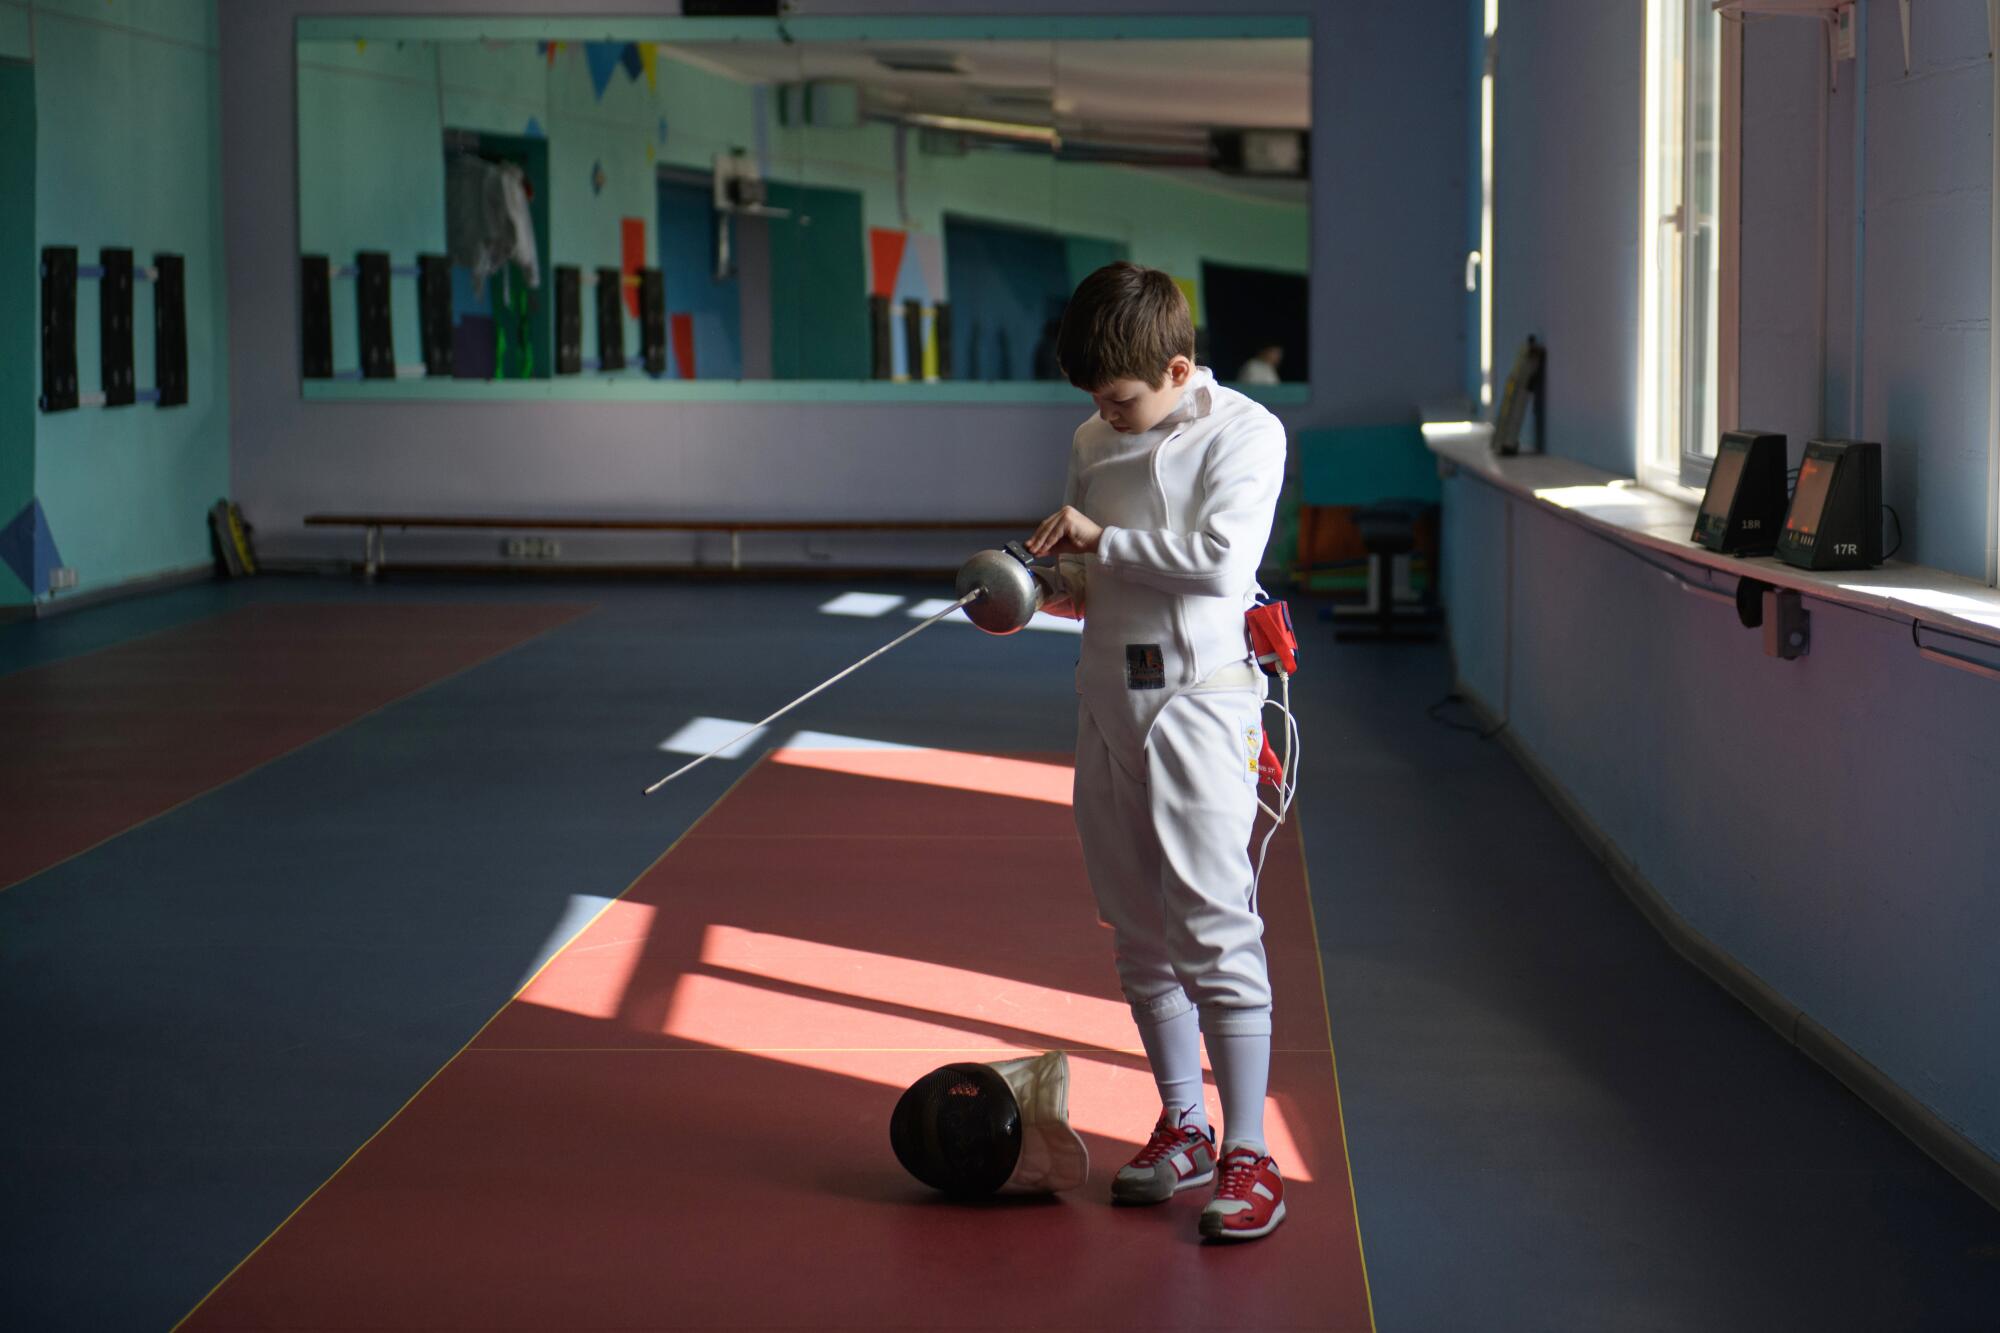 Sunlight casts stripes on the floor as a child in fencing gear gets ready to practice.